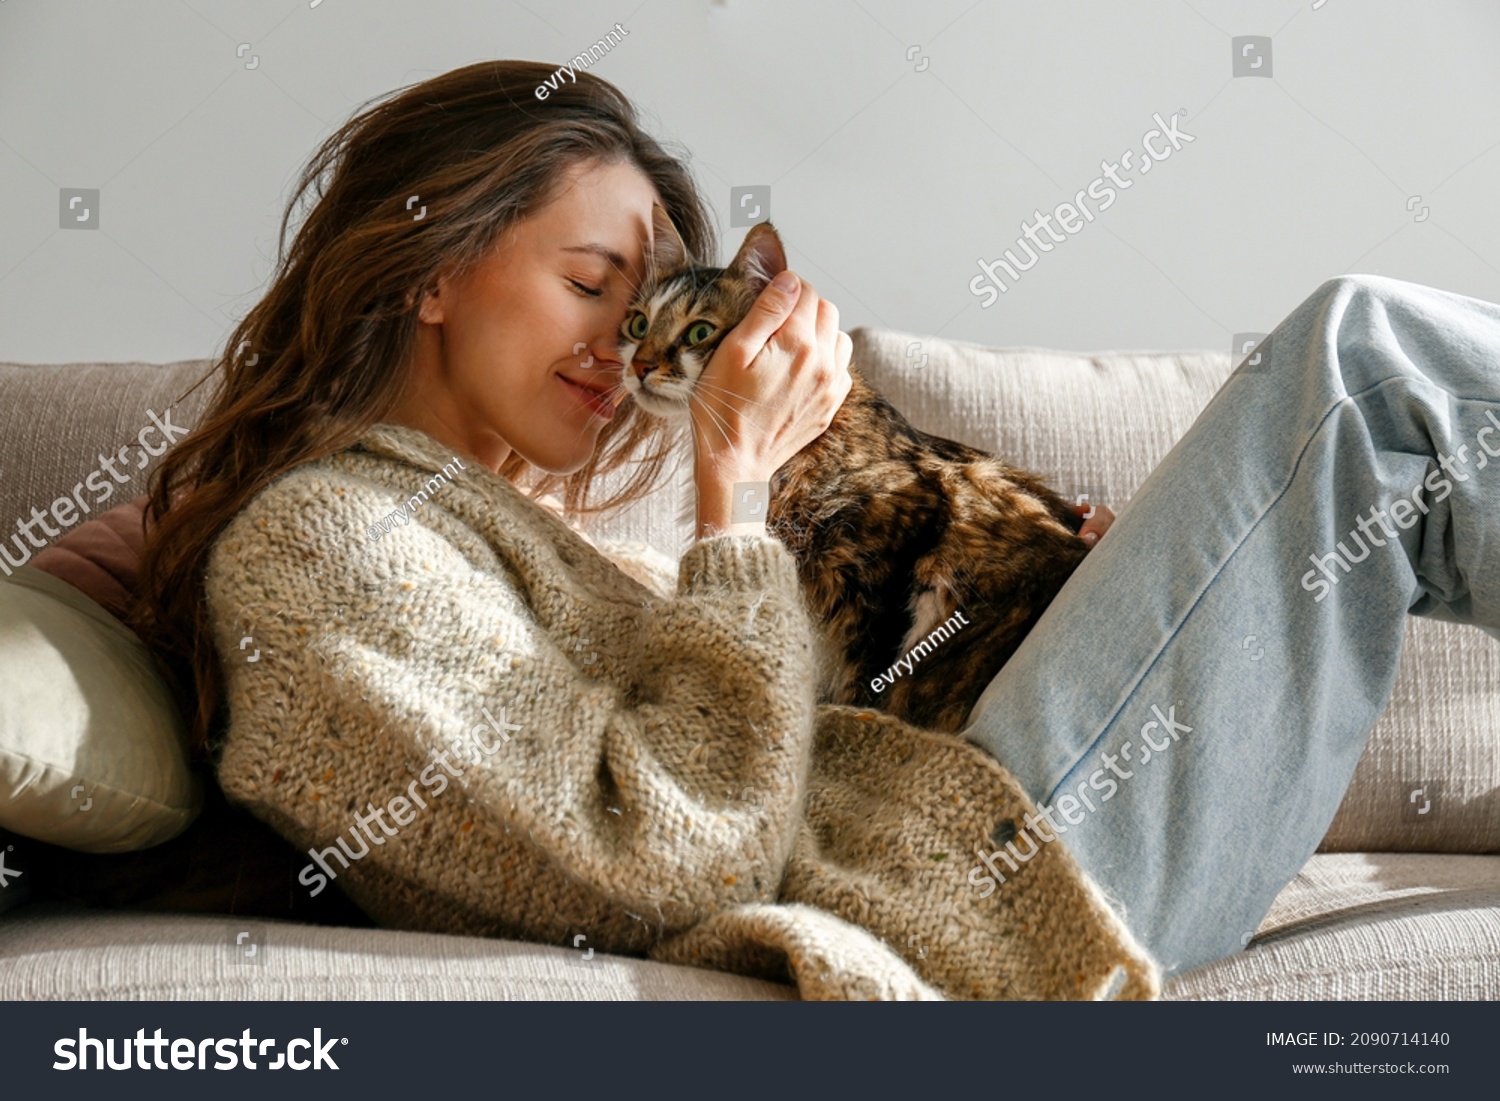 Portrait of young woman holding cute siberian cat with green eyes. Female hugging her cute long hair kitty. Background, copy space, close up. Adorable domestic pet concept. #2090714140